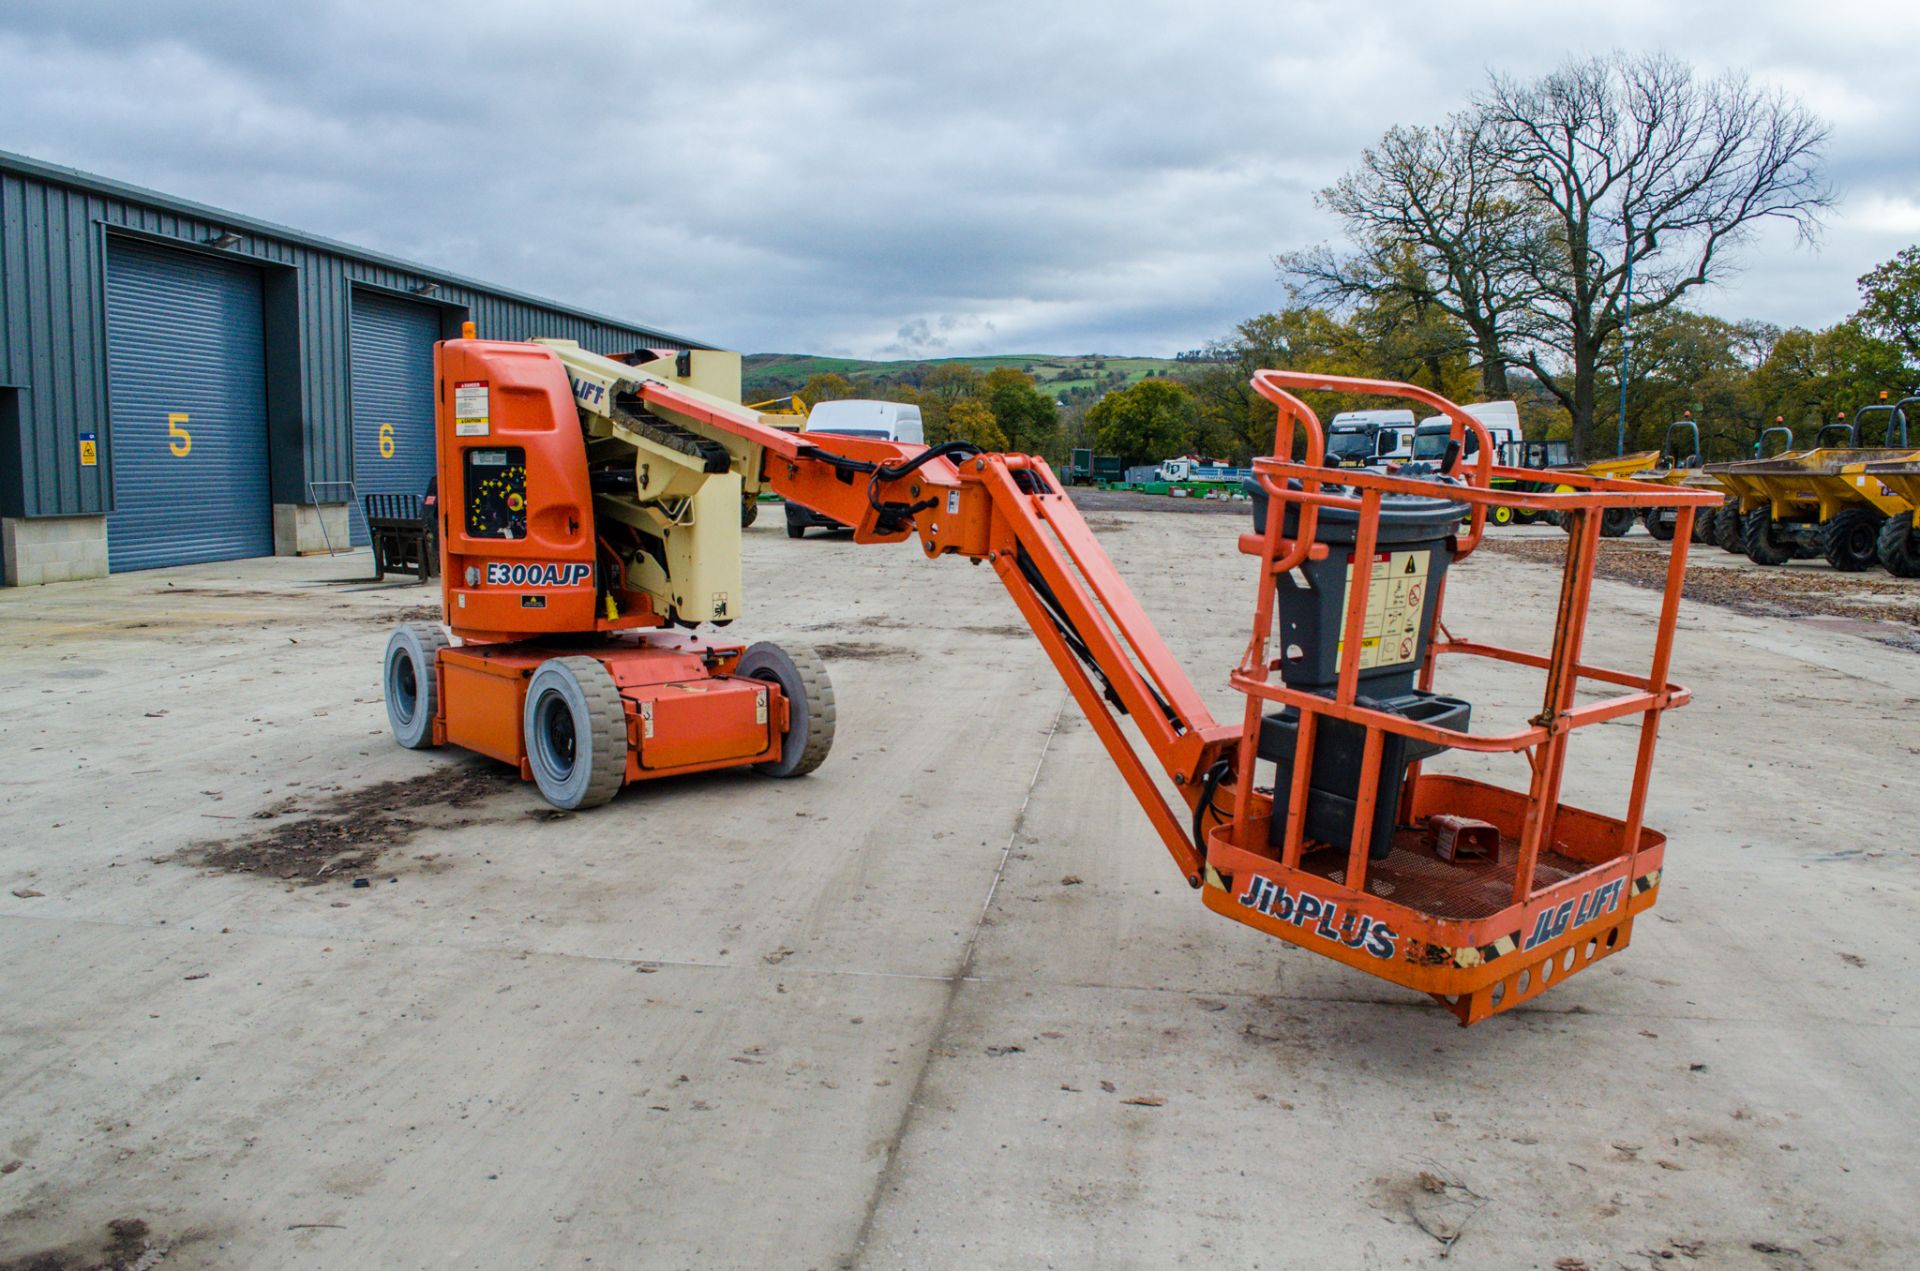 JLG 300AJP battery operated 30ft articulated boom lift Year: 2001 S/N: 0065700 Recorded hours: 663 - Image 2 of 16